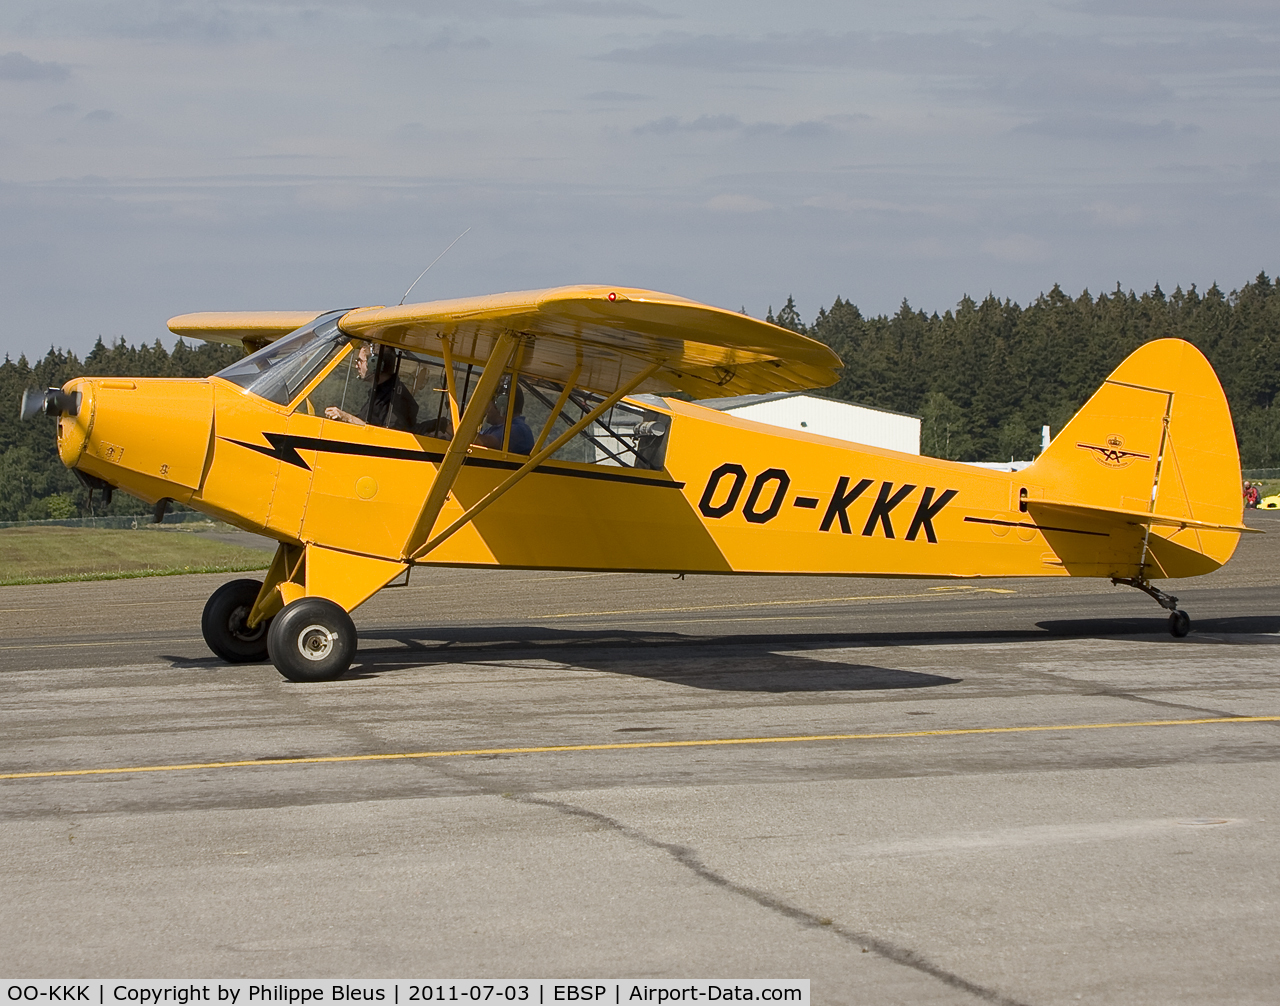 OO-KKK, 1953 Piper L-18C Super Cub (PA-18-95) C/N 18-3155, Yellow Cub taxiing to rwy 05. Was destroyed in a disastrous accident in October 2011 after taking off at Spa Laboru (Theux). Both seasoned pilots died.